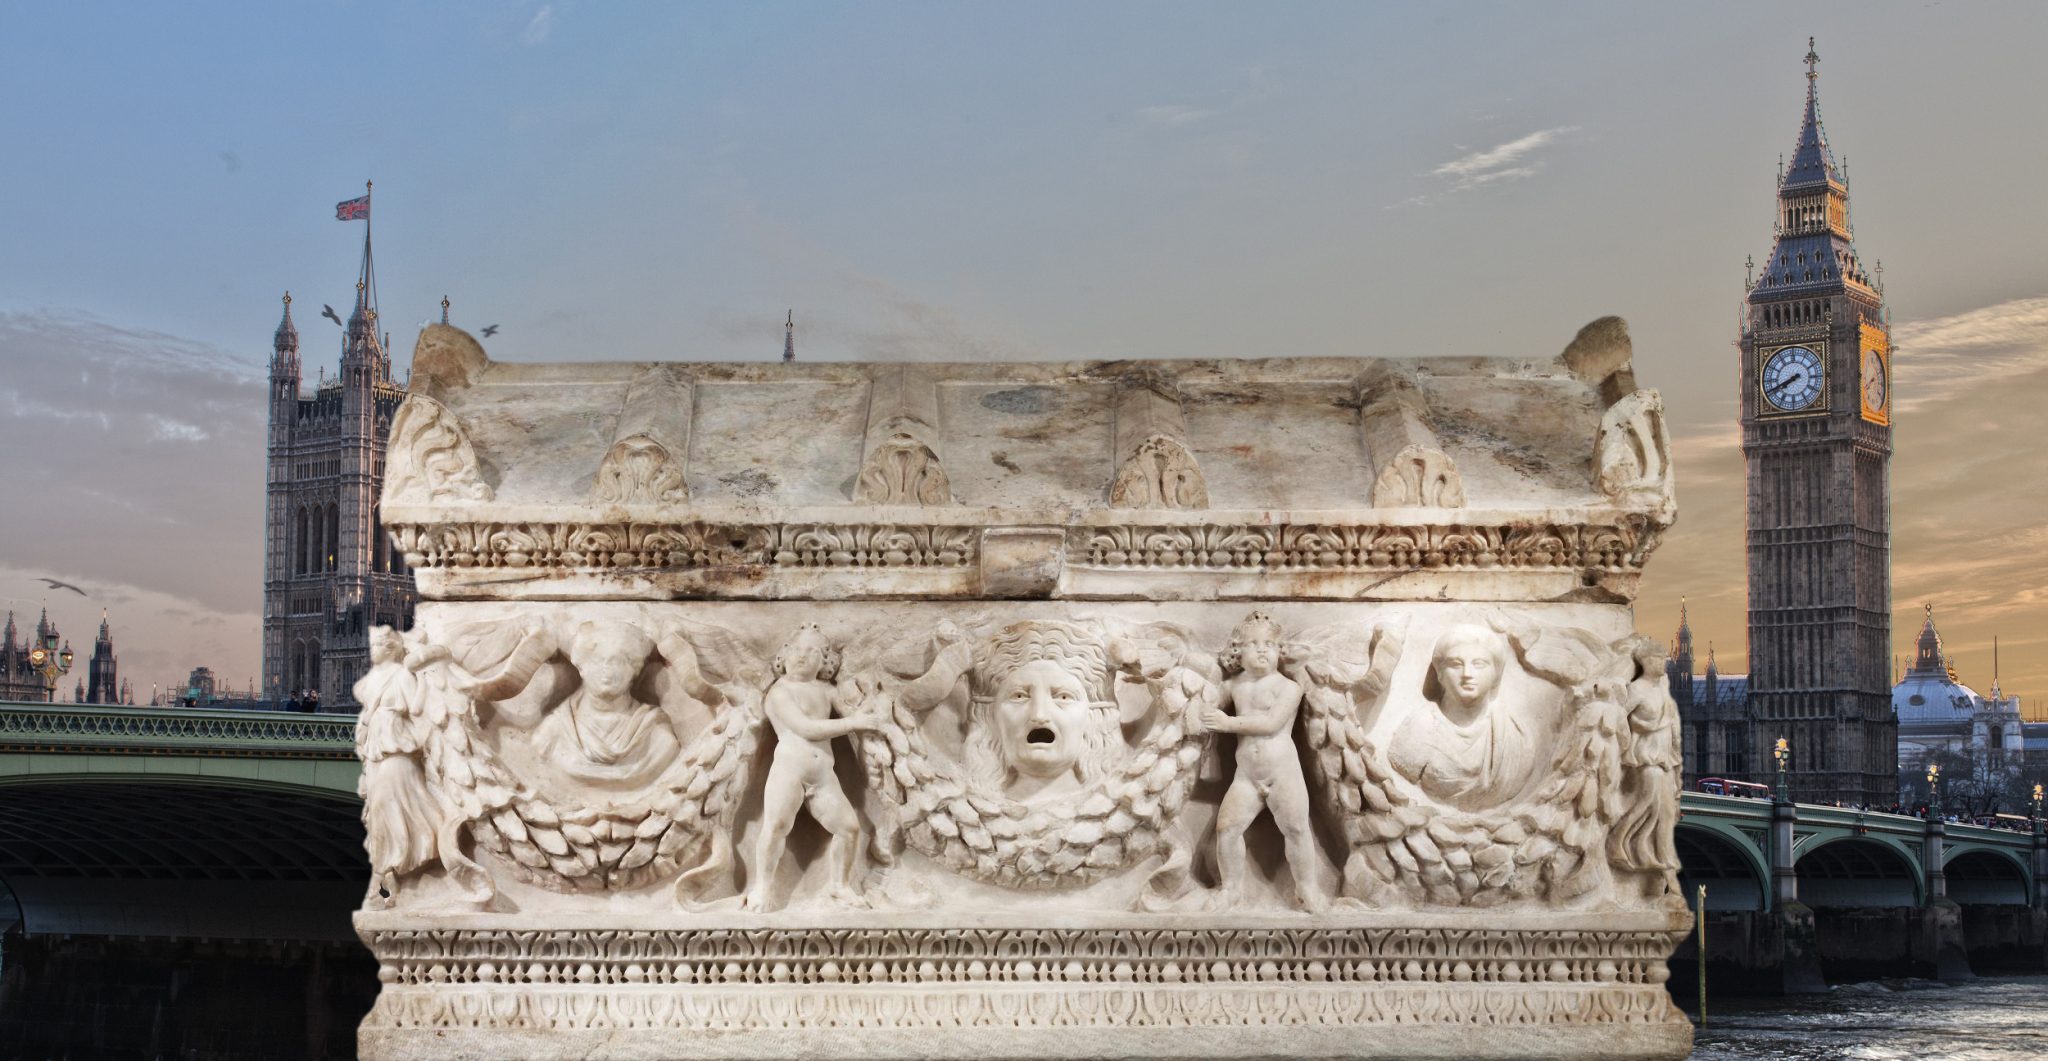 A Roman sarcophagus in London. NOTE: this is not the actual sarcophagus found.